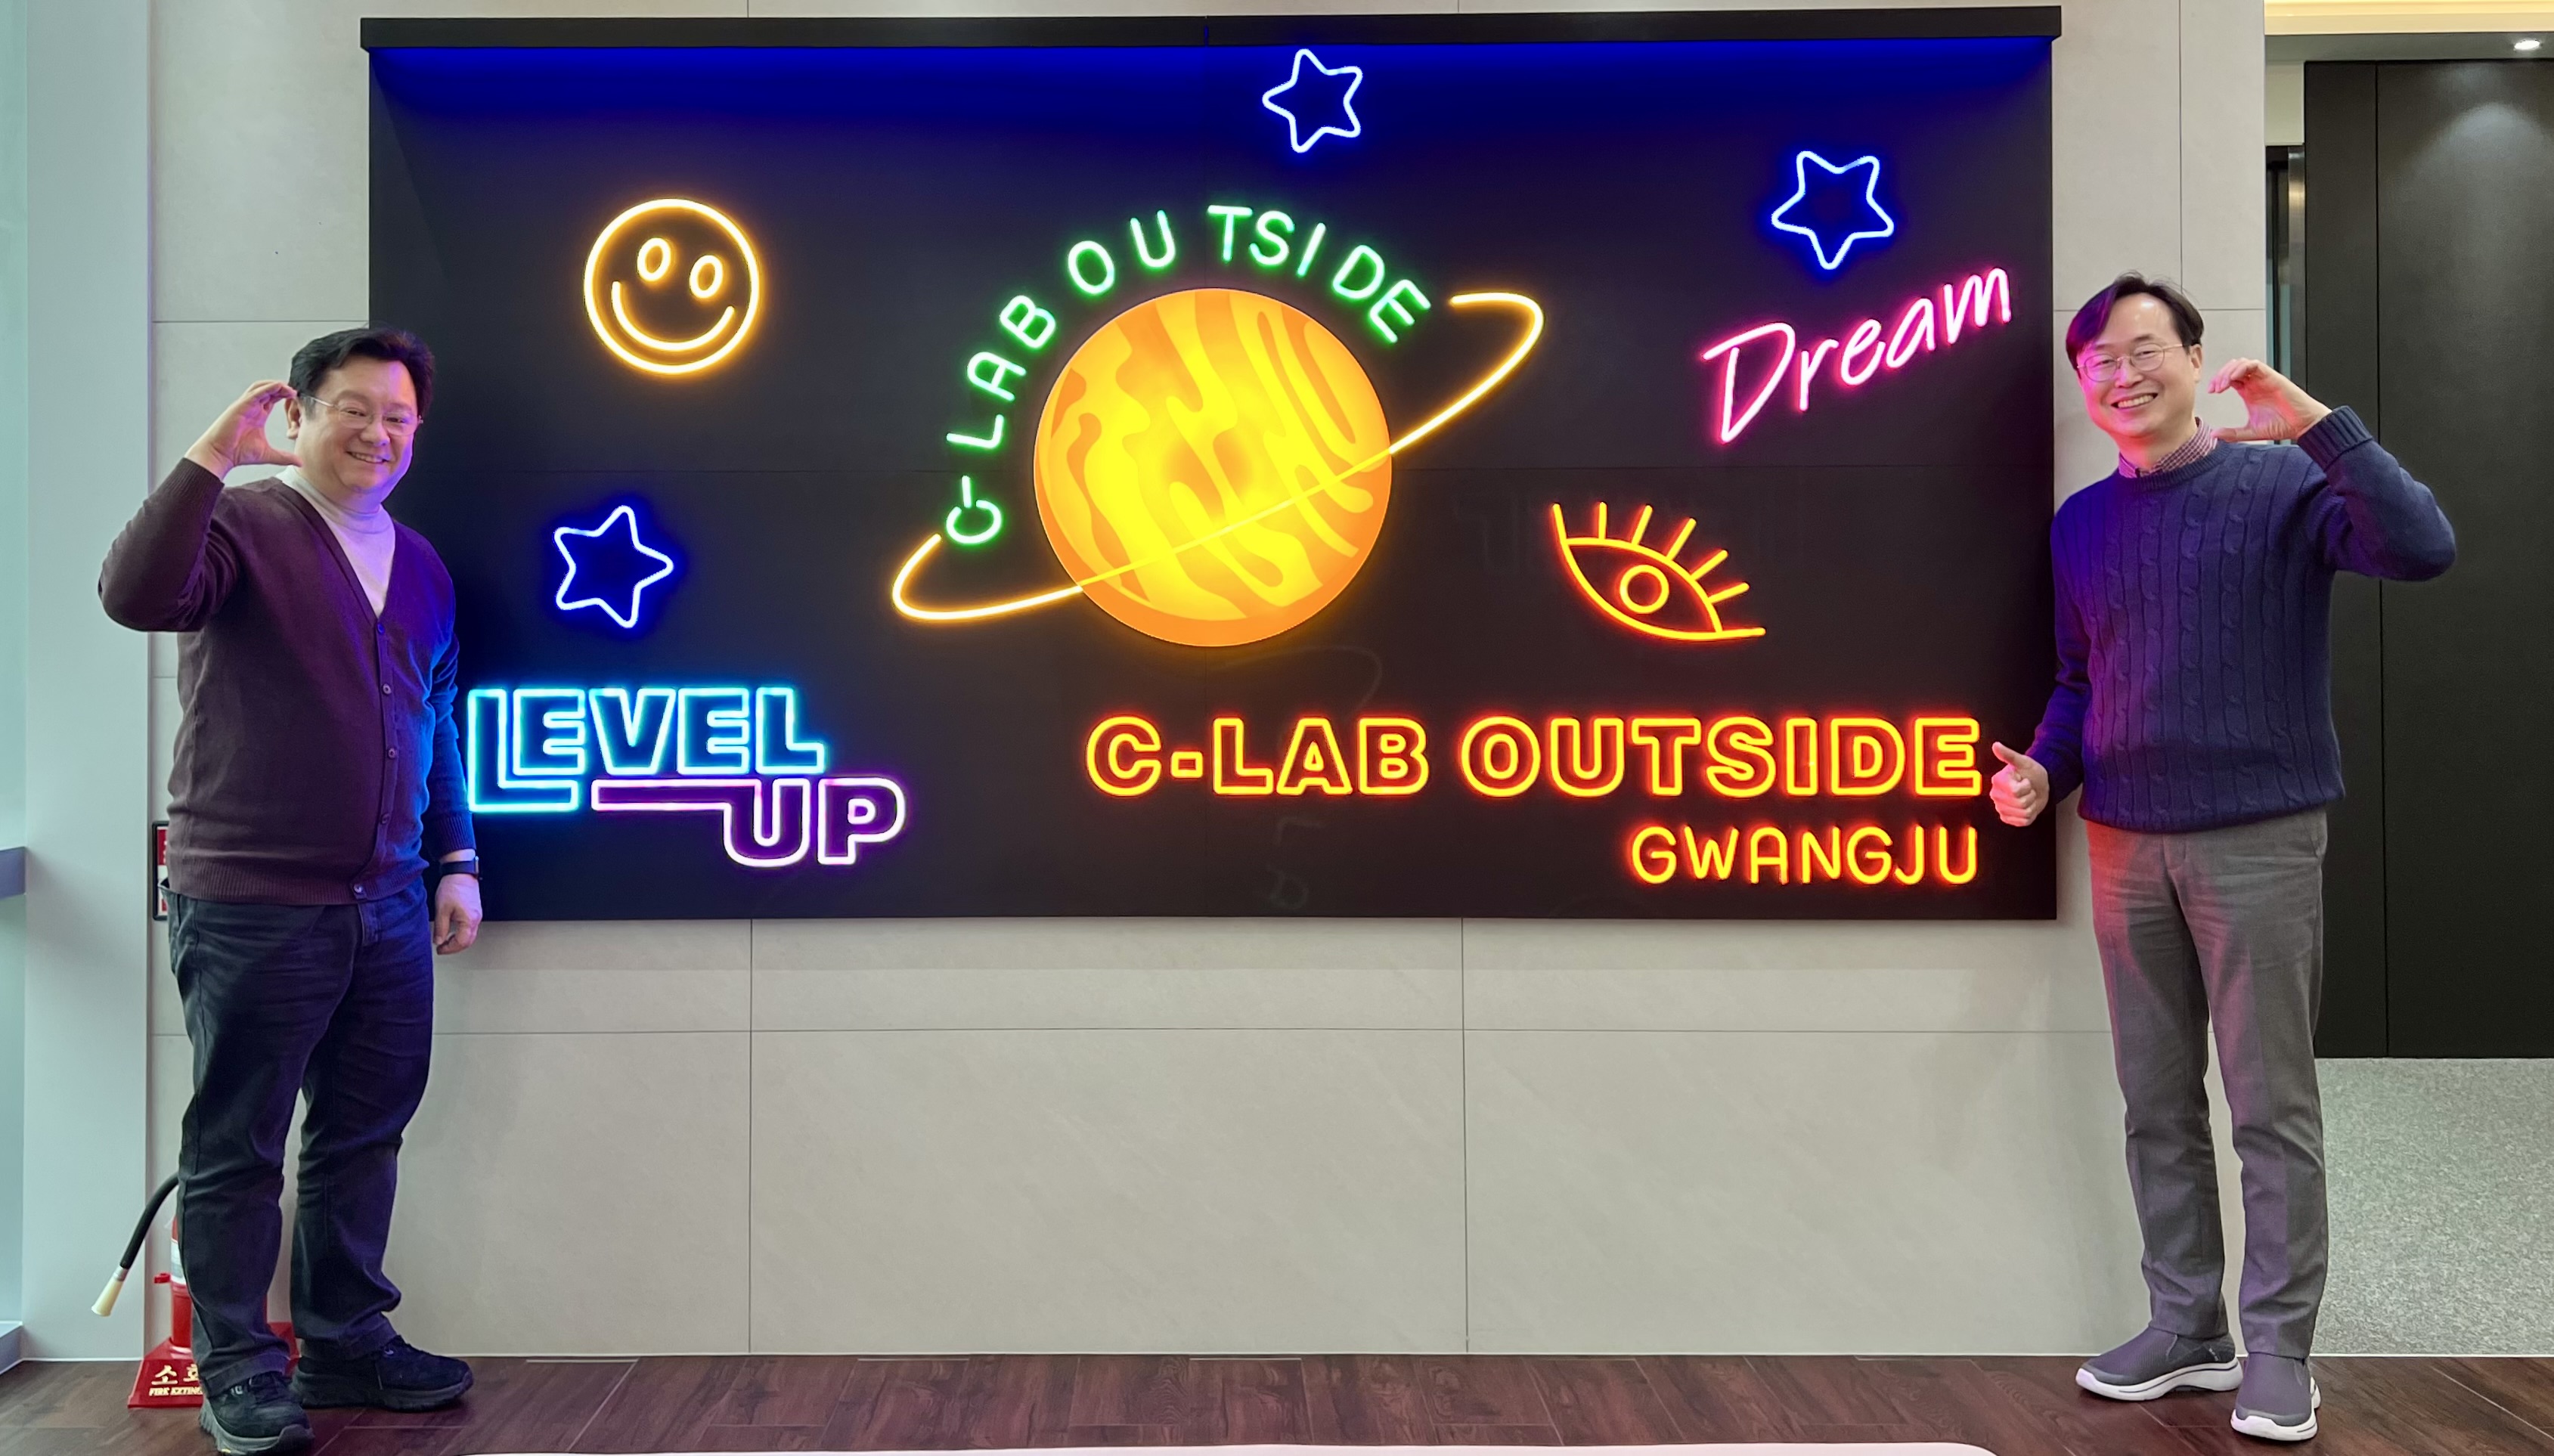 TEDi MEDi, a GIST faculty start-up company, was selected for Samsung Electronics' startup development program (C-Lab Outside)... Development of a prototype photobiomodulation sleep improvement wearable device 이미지